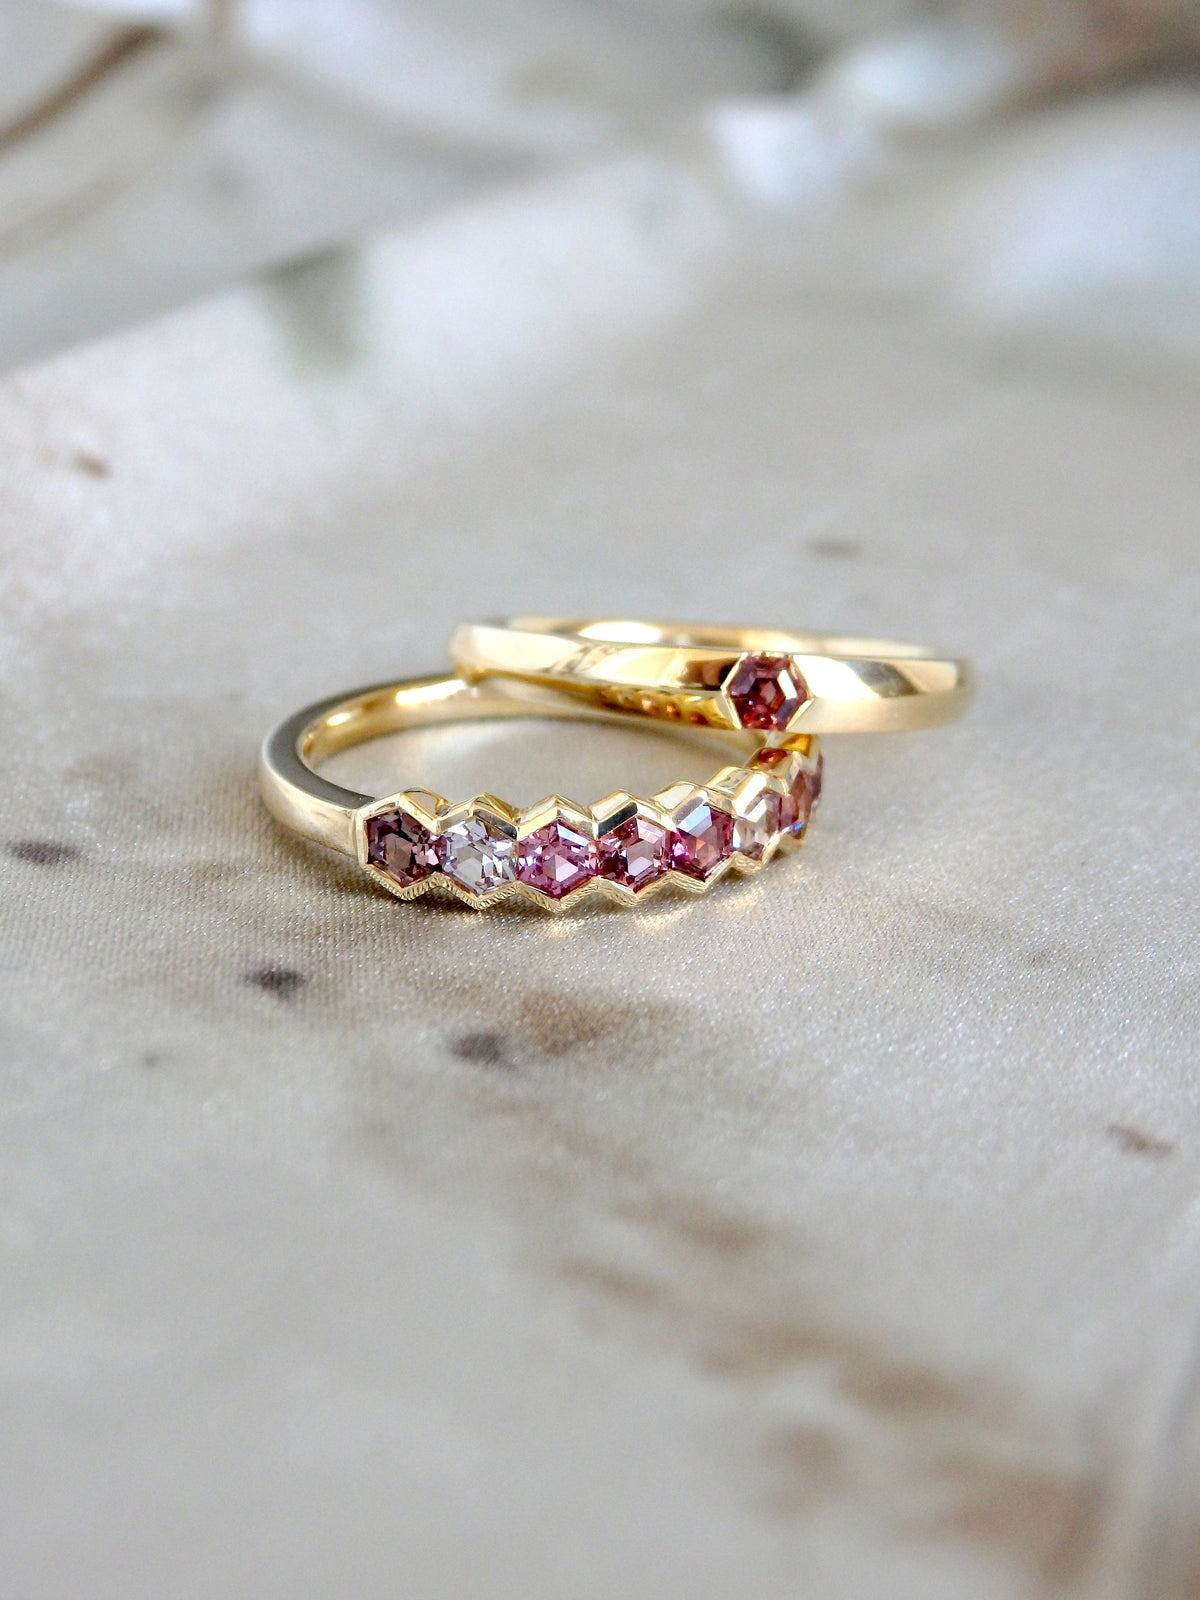 &quot;Summer&quot; Hexagonal Spinel Ring, 18ct gold band